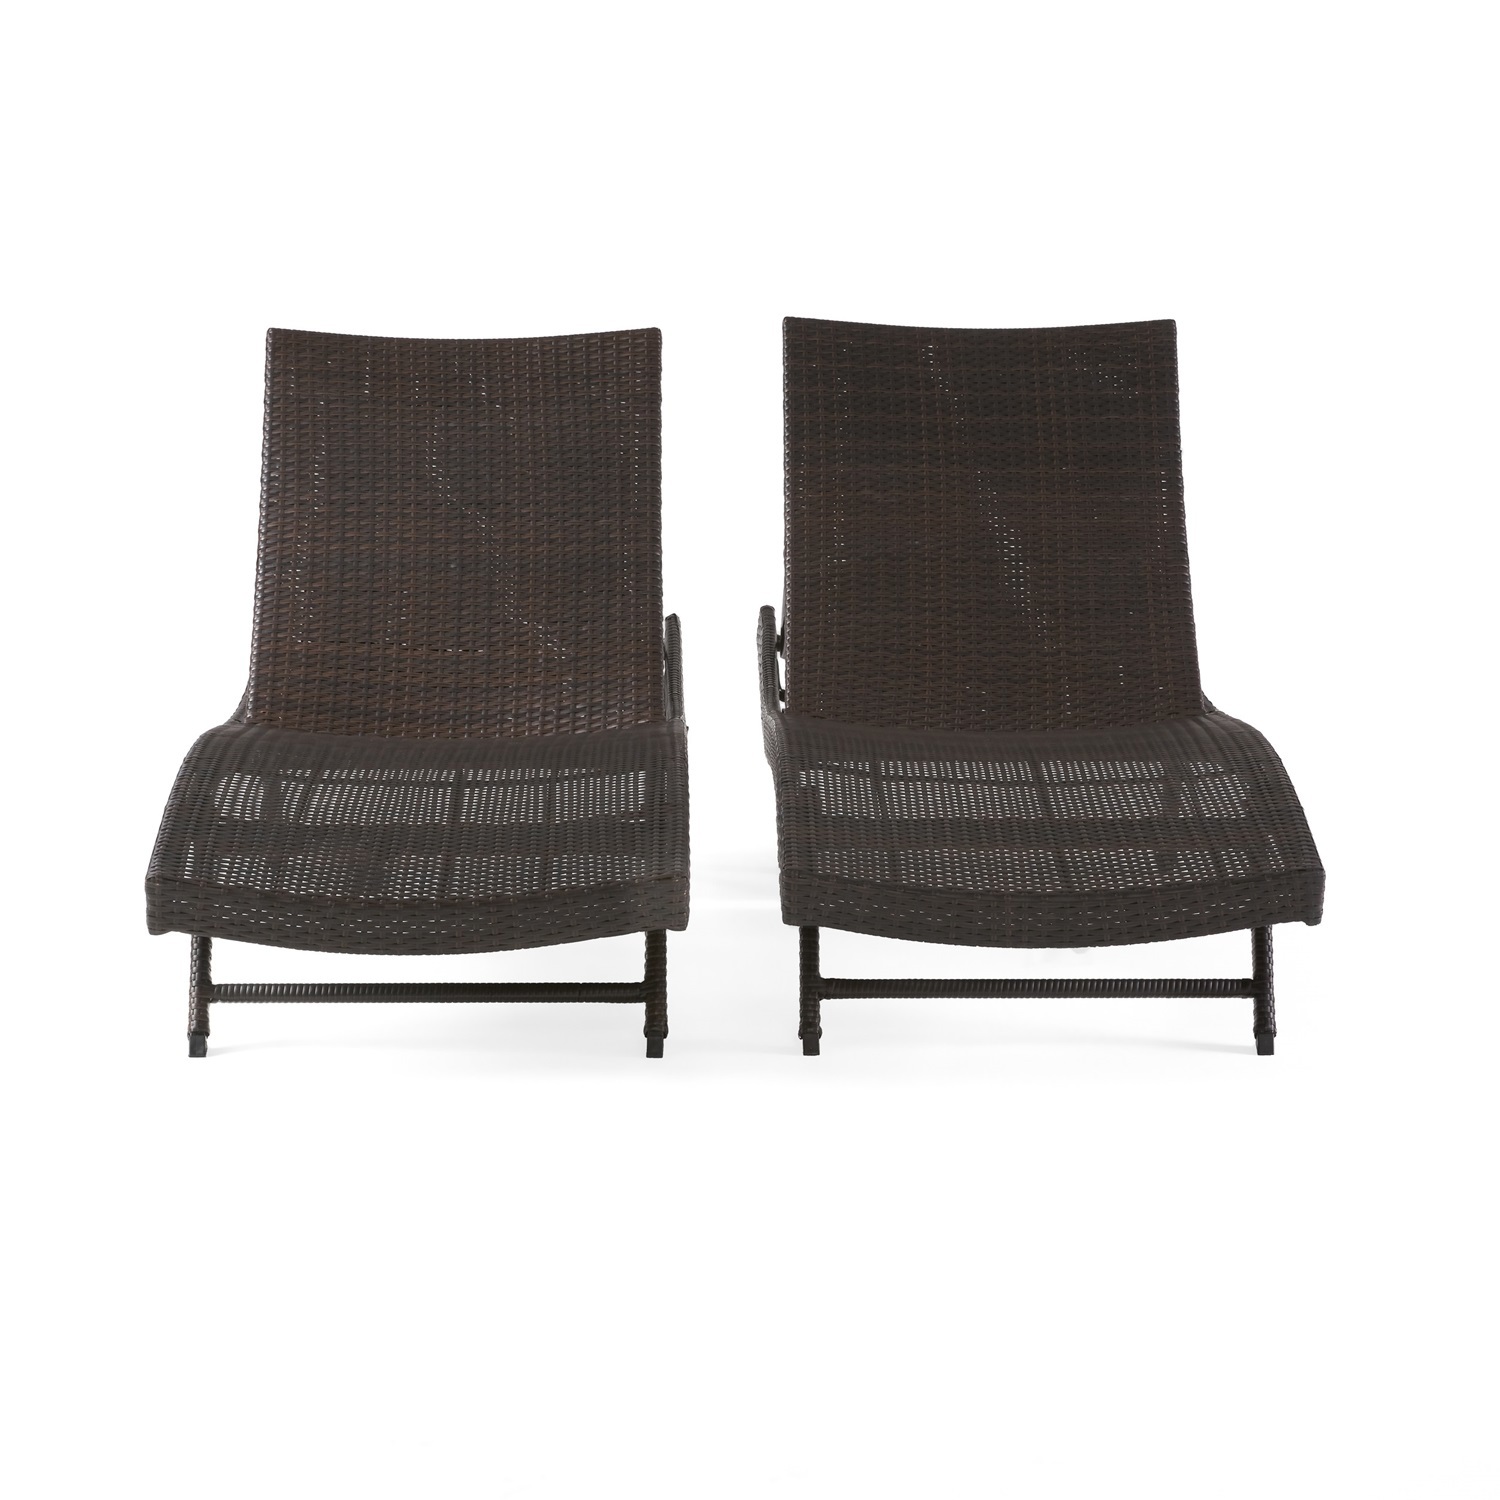 Canddidliike Set of 2 Rattan Patio Chaise Lounges, Outdoor Wicker Reclining Lounge Chairs with Adjustable - Brown - image 3 of 10